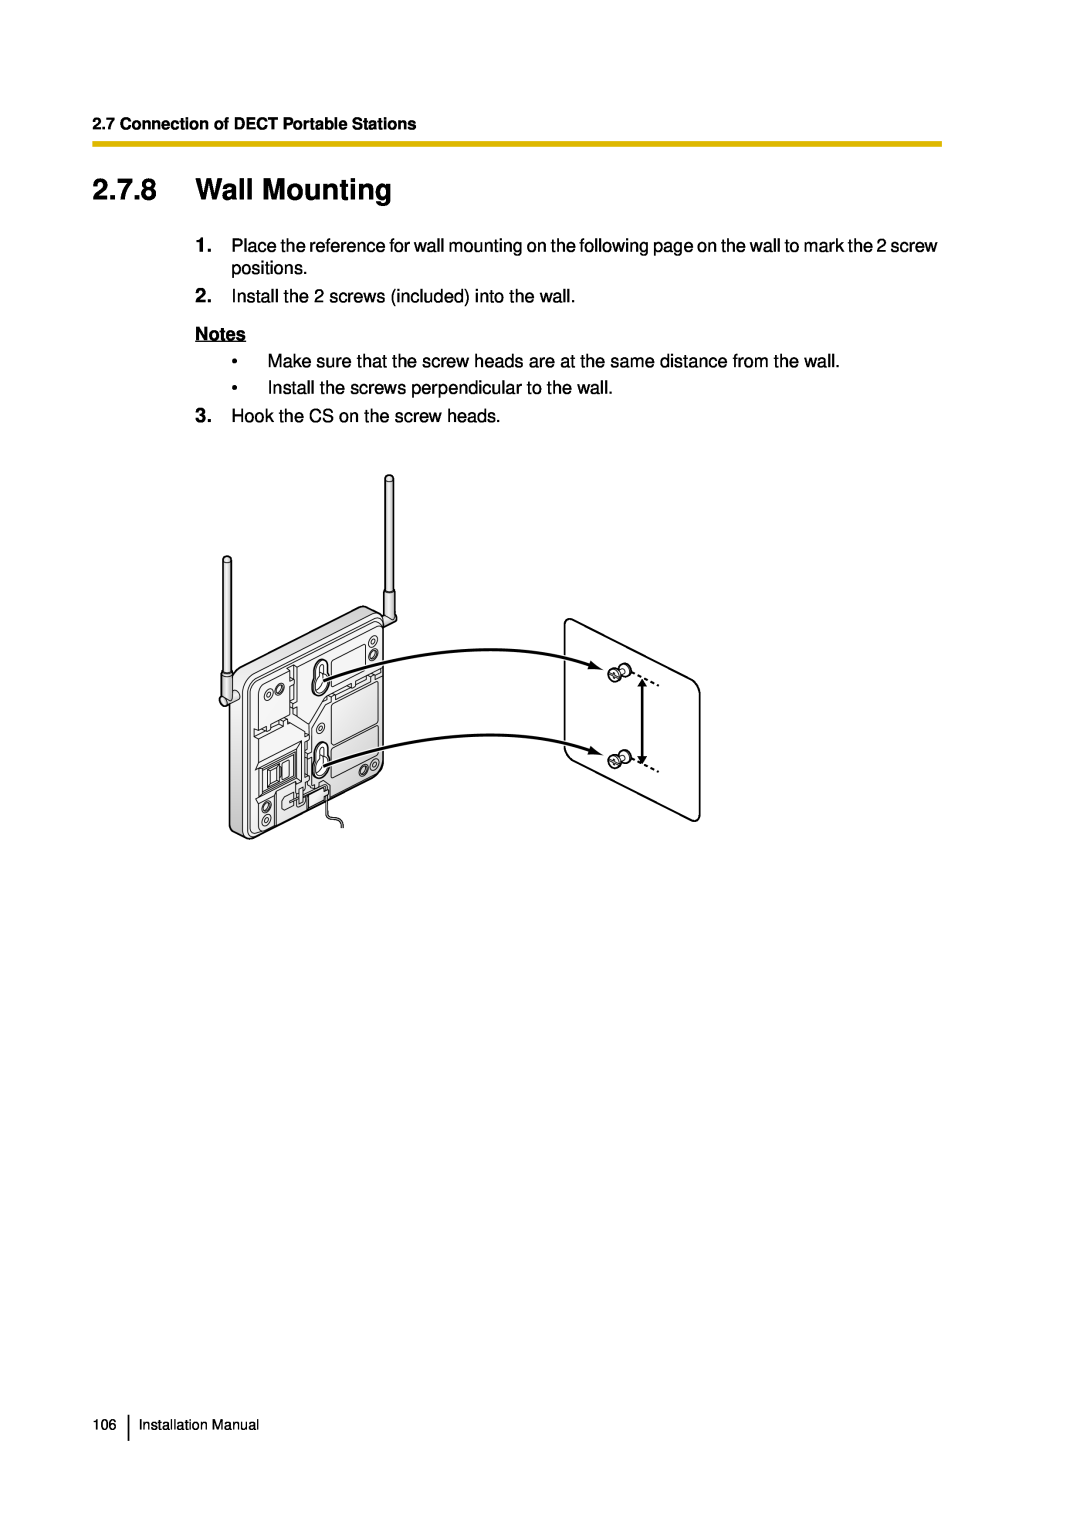 Panasonic KX-TDA30 2.7.8Wall Mounting, Install the 2 screws included into the wall, Notes, Hook the CS on the screw heads 